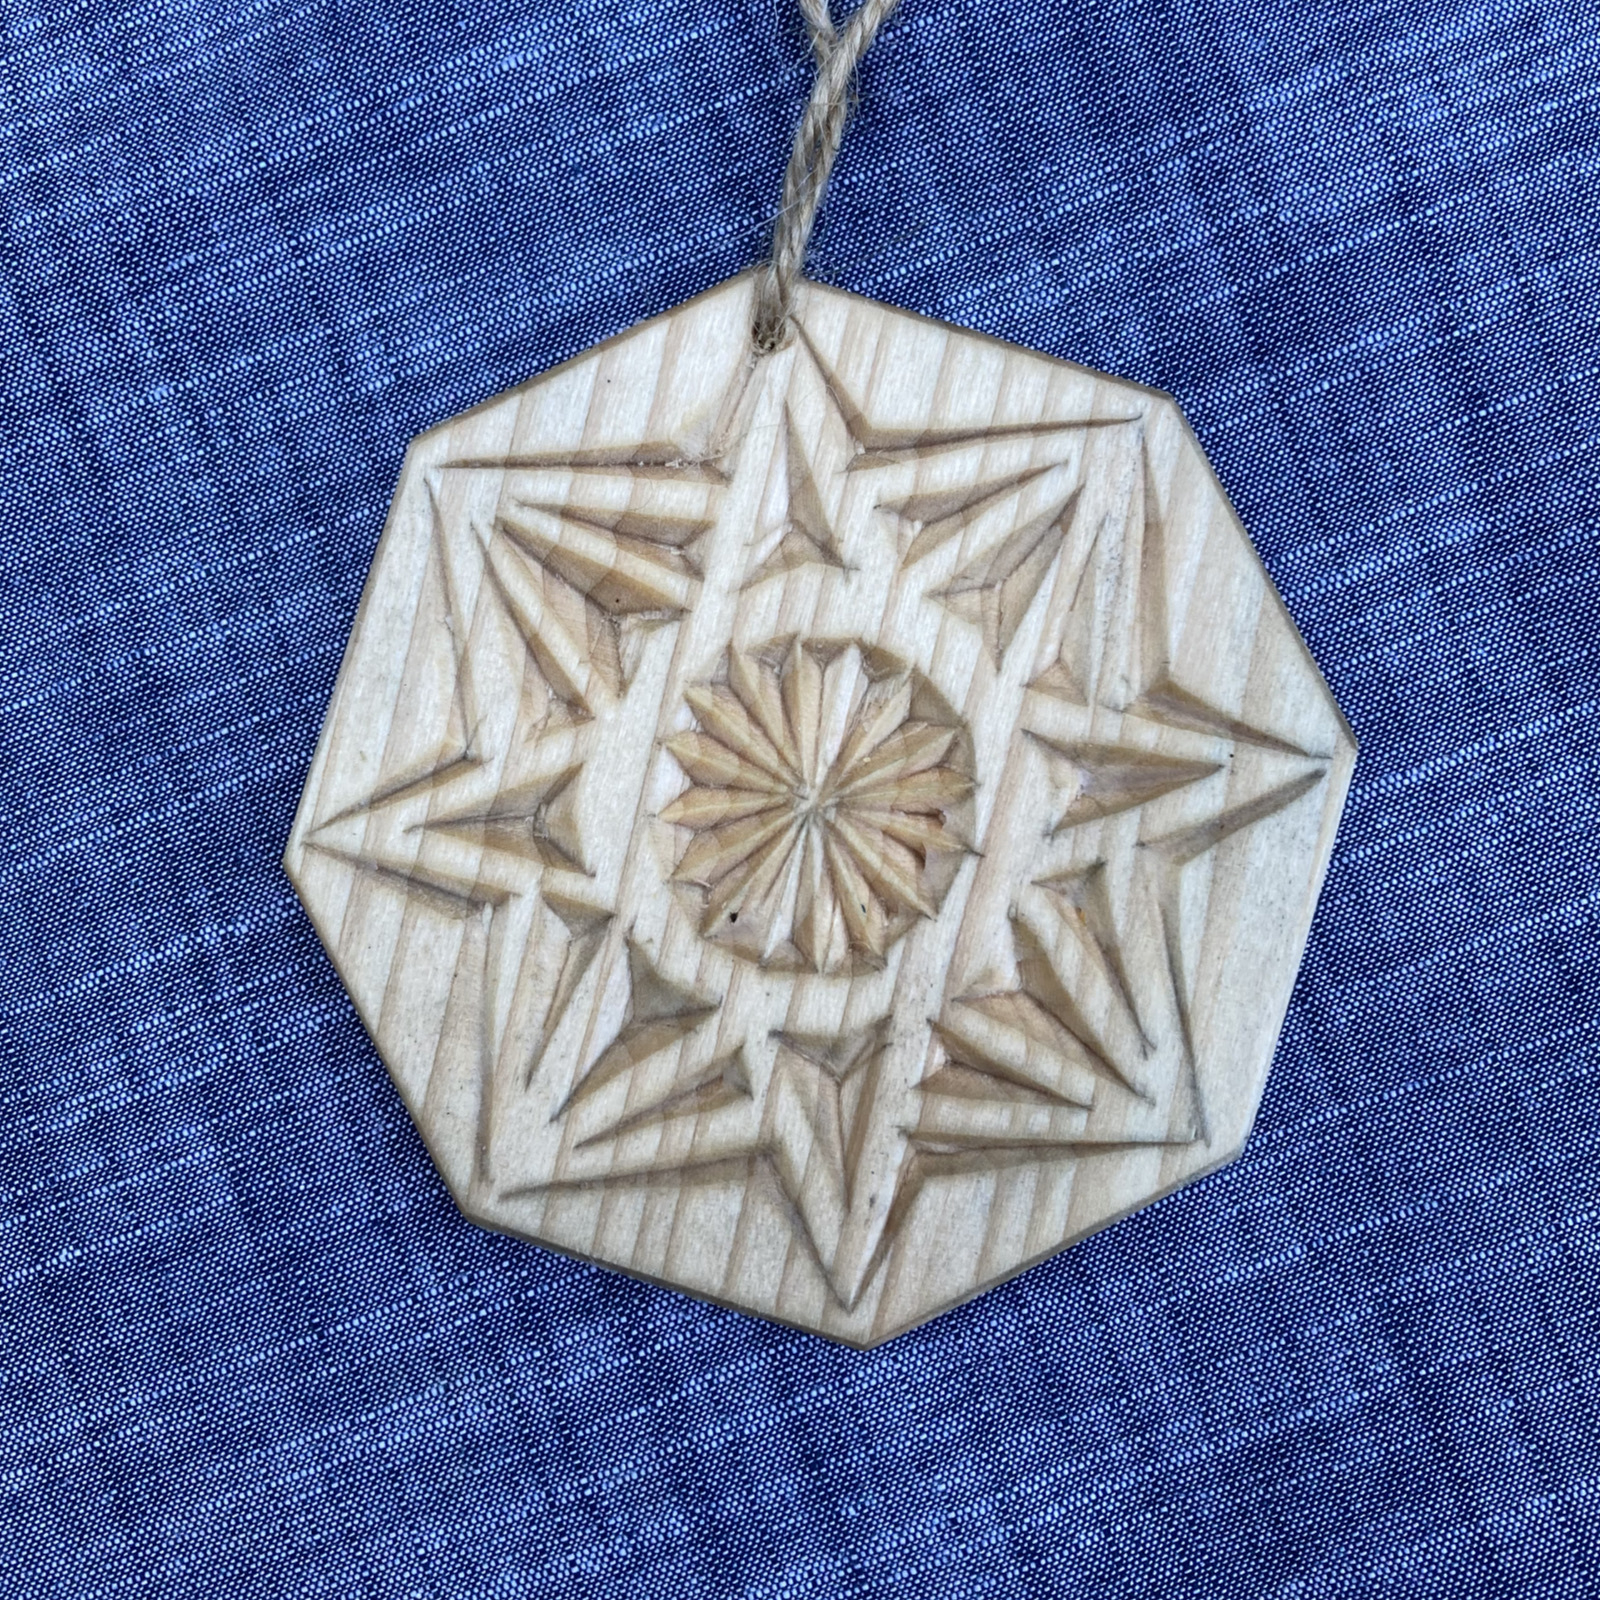 chip-carved tree ornament with eight-point star pattern